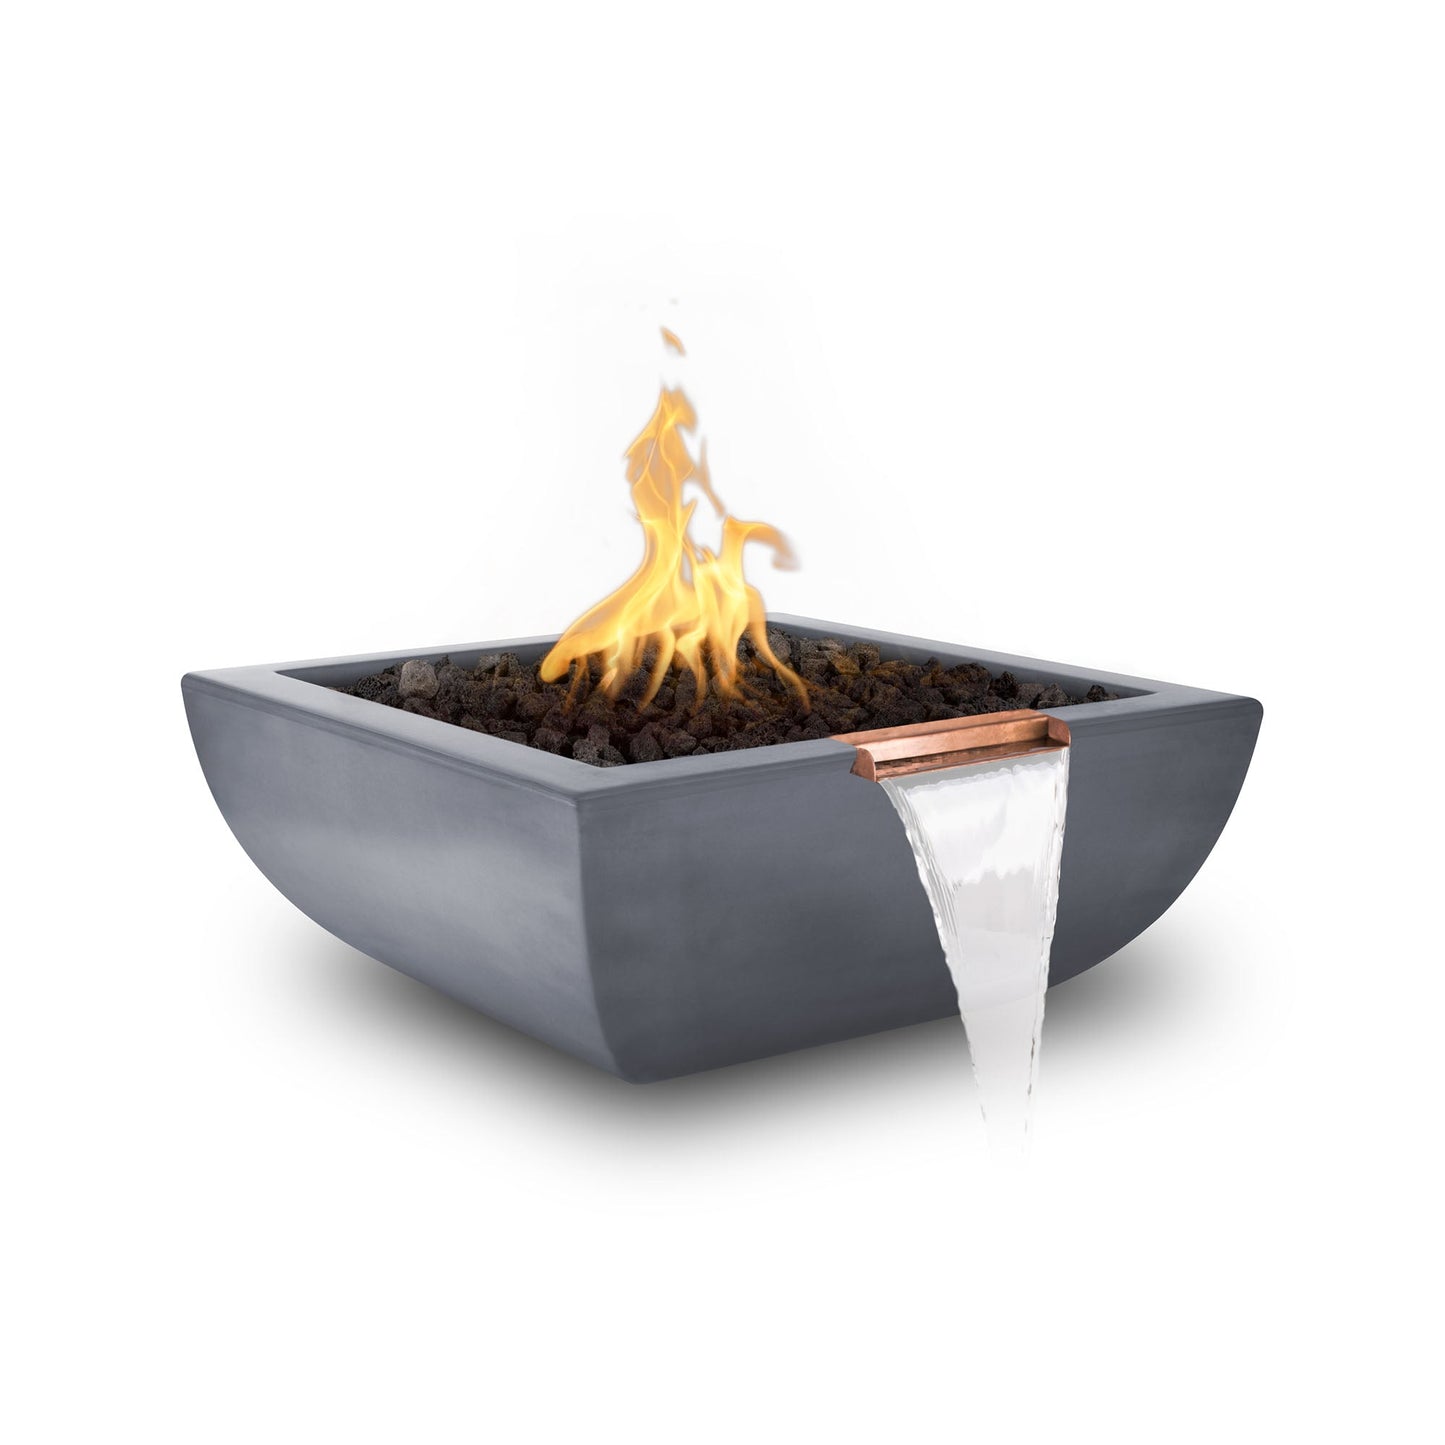 The Outdoor Plus Square Avalon 24" Rustic Moss Stone GFRC Concrete Liquid Propane Fire & Water Bowl with Match Lit with Flame Sense Ignition